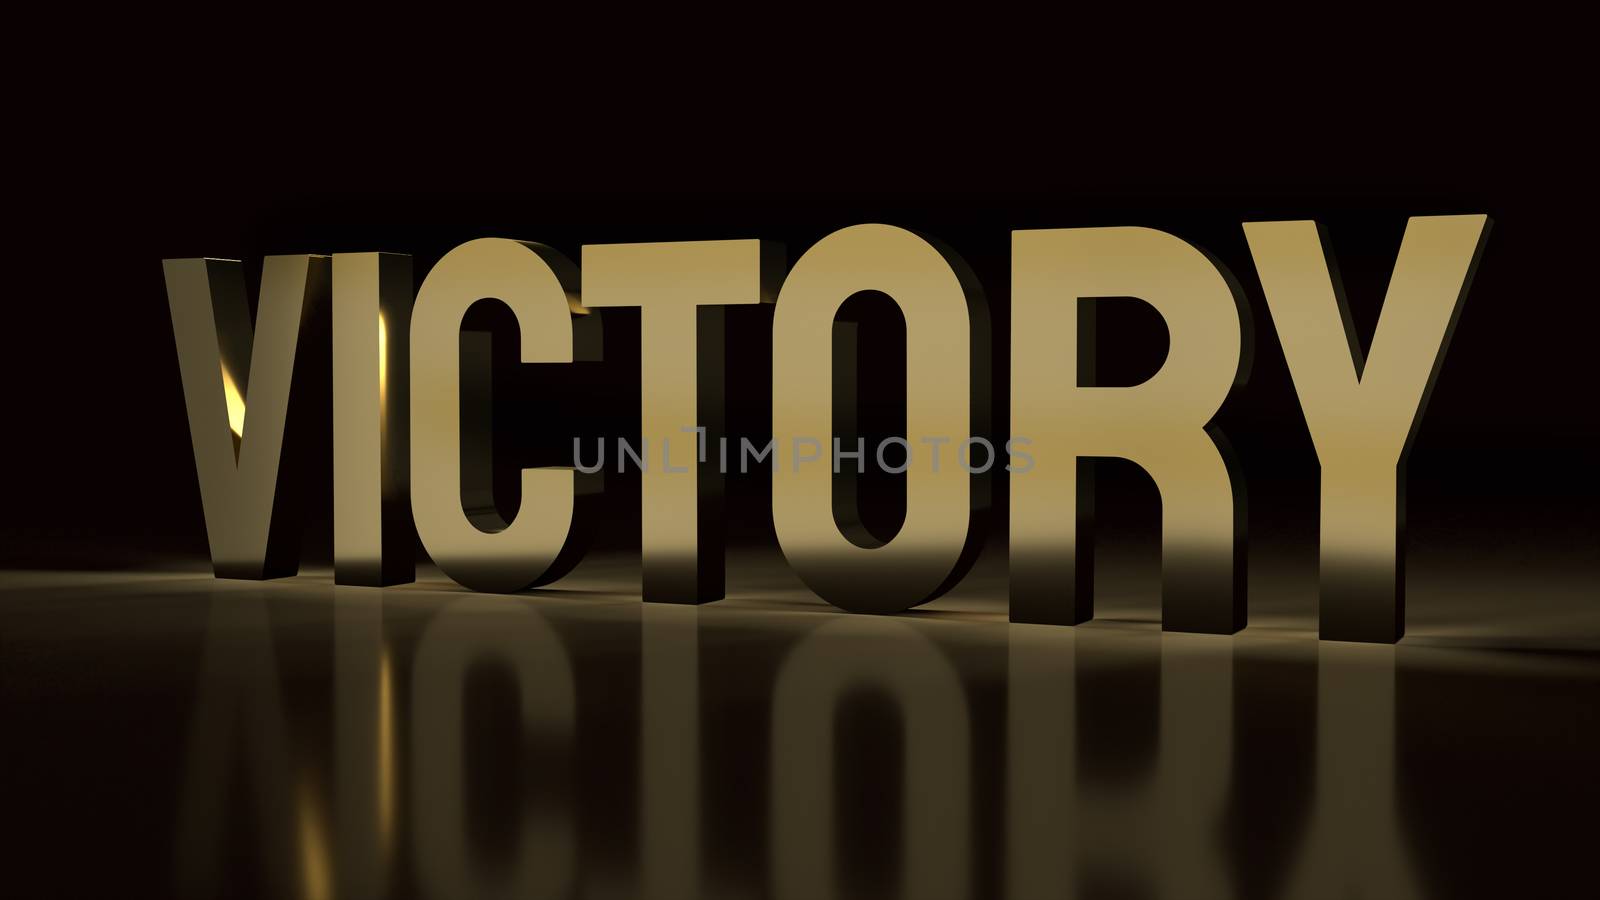 The victory text gold surface in black background 3d rendering. by Niphon_13